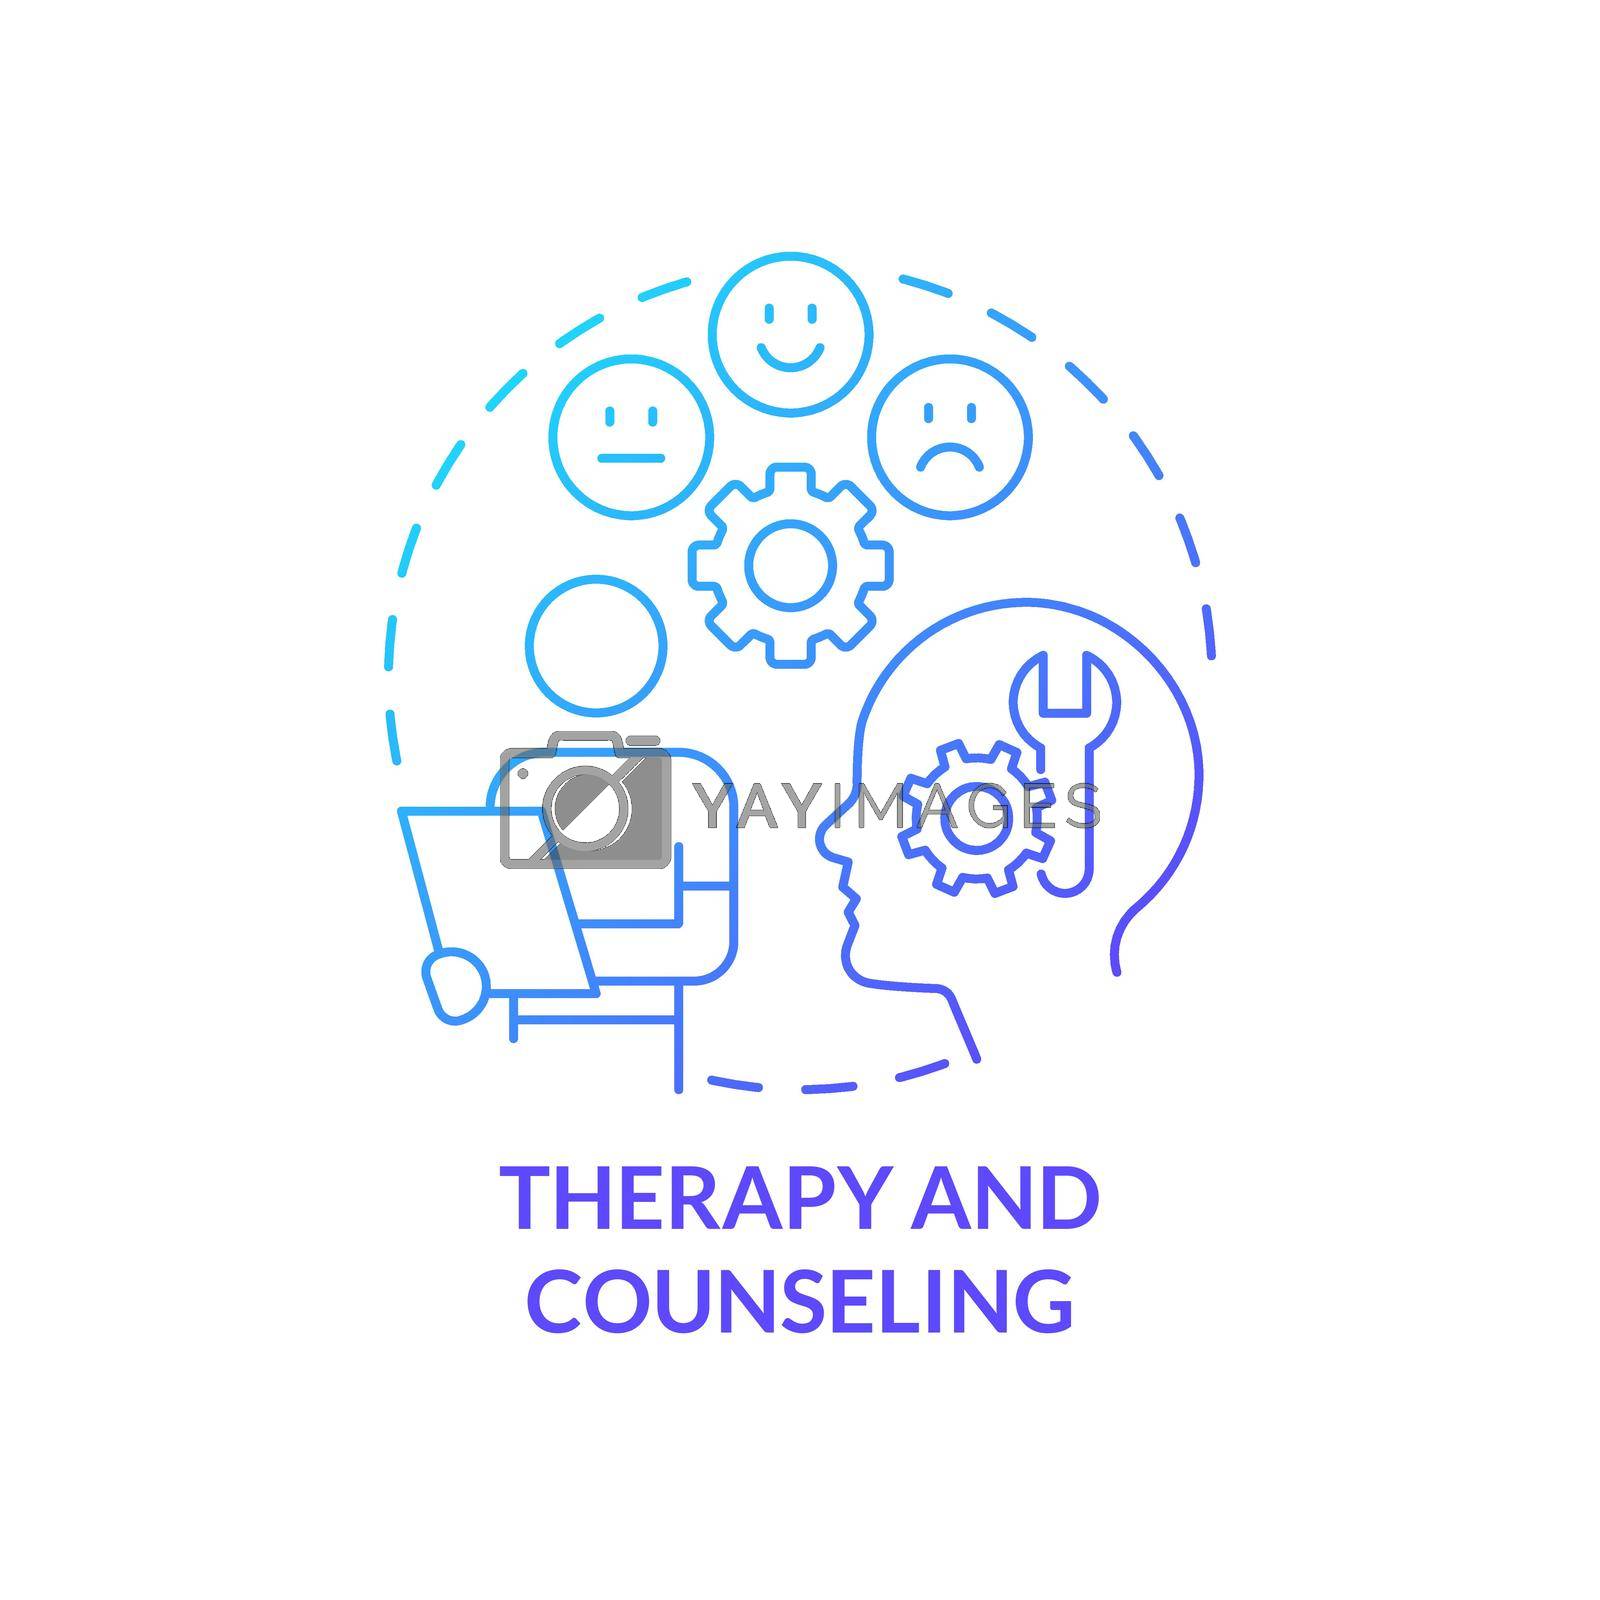 Royalty free image of Therapy and counseling blue gradient concept icon by bsd